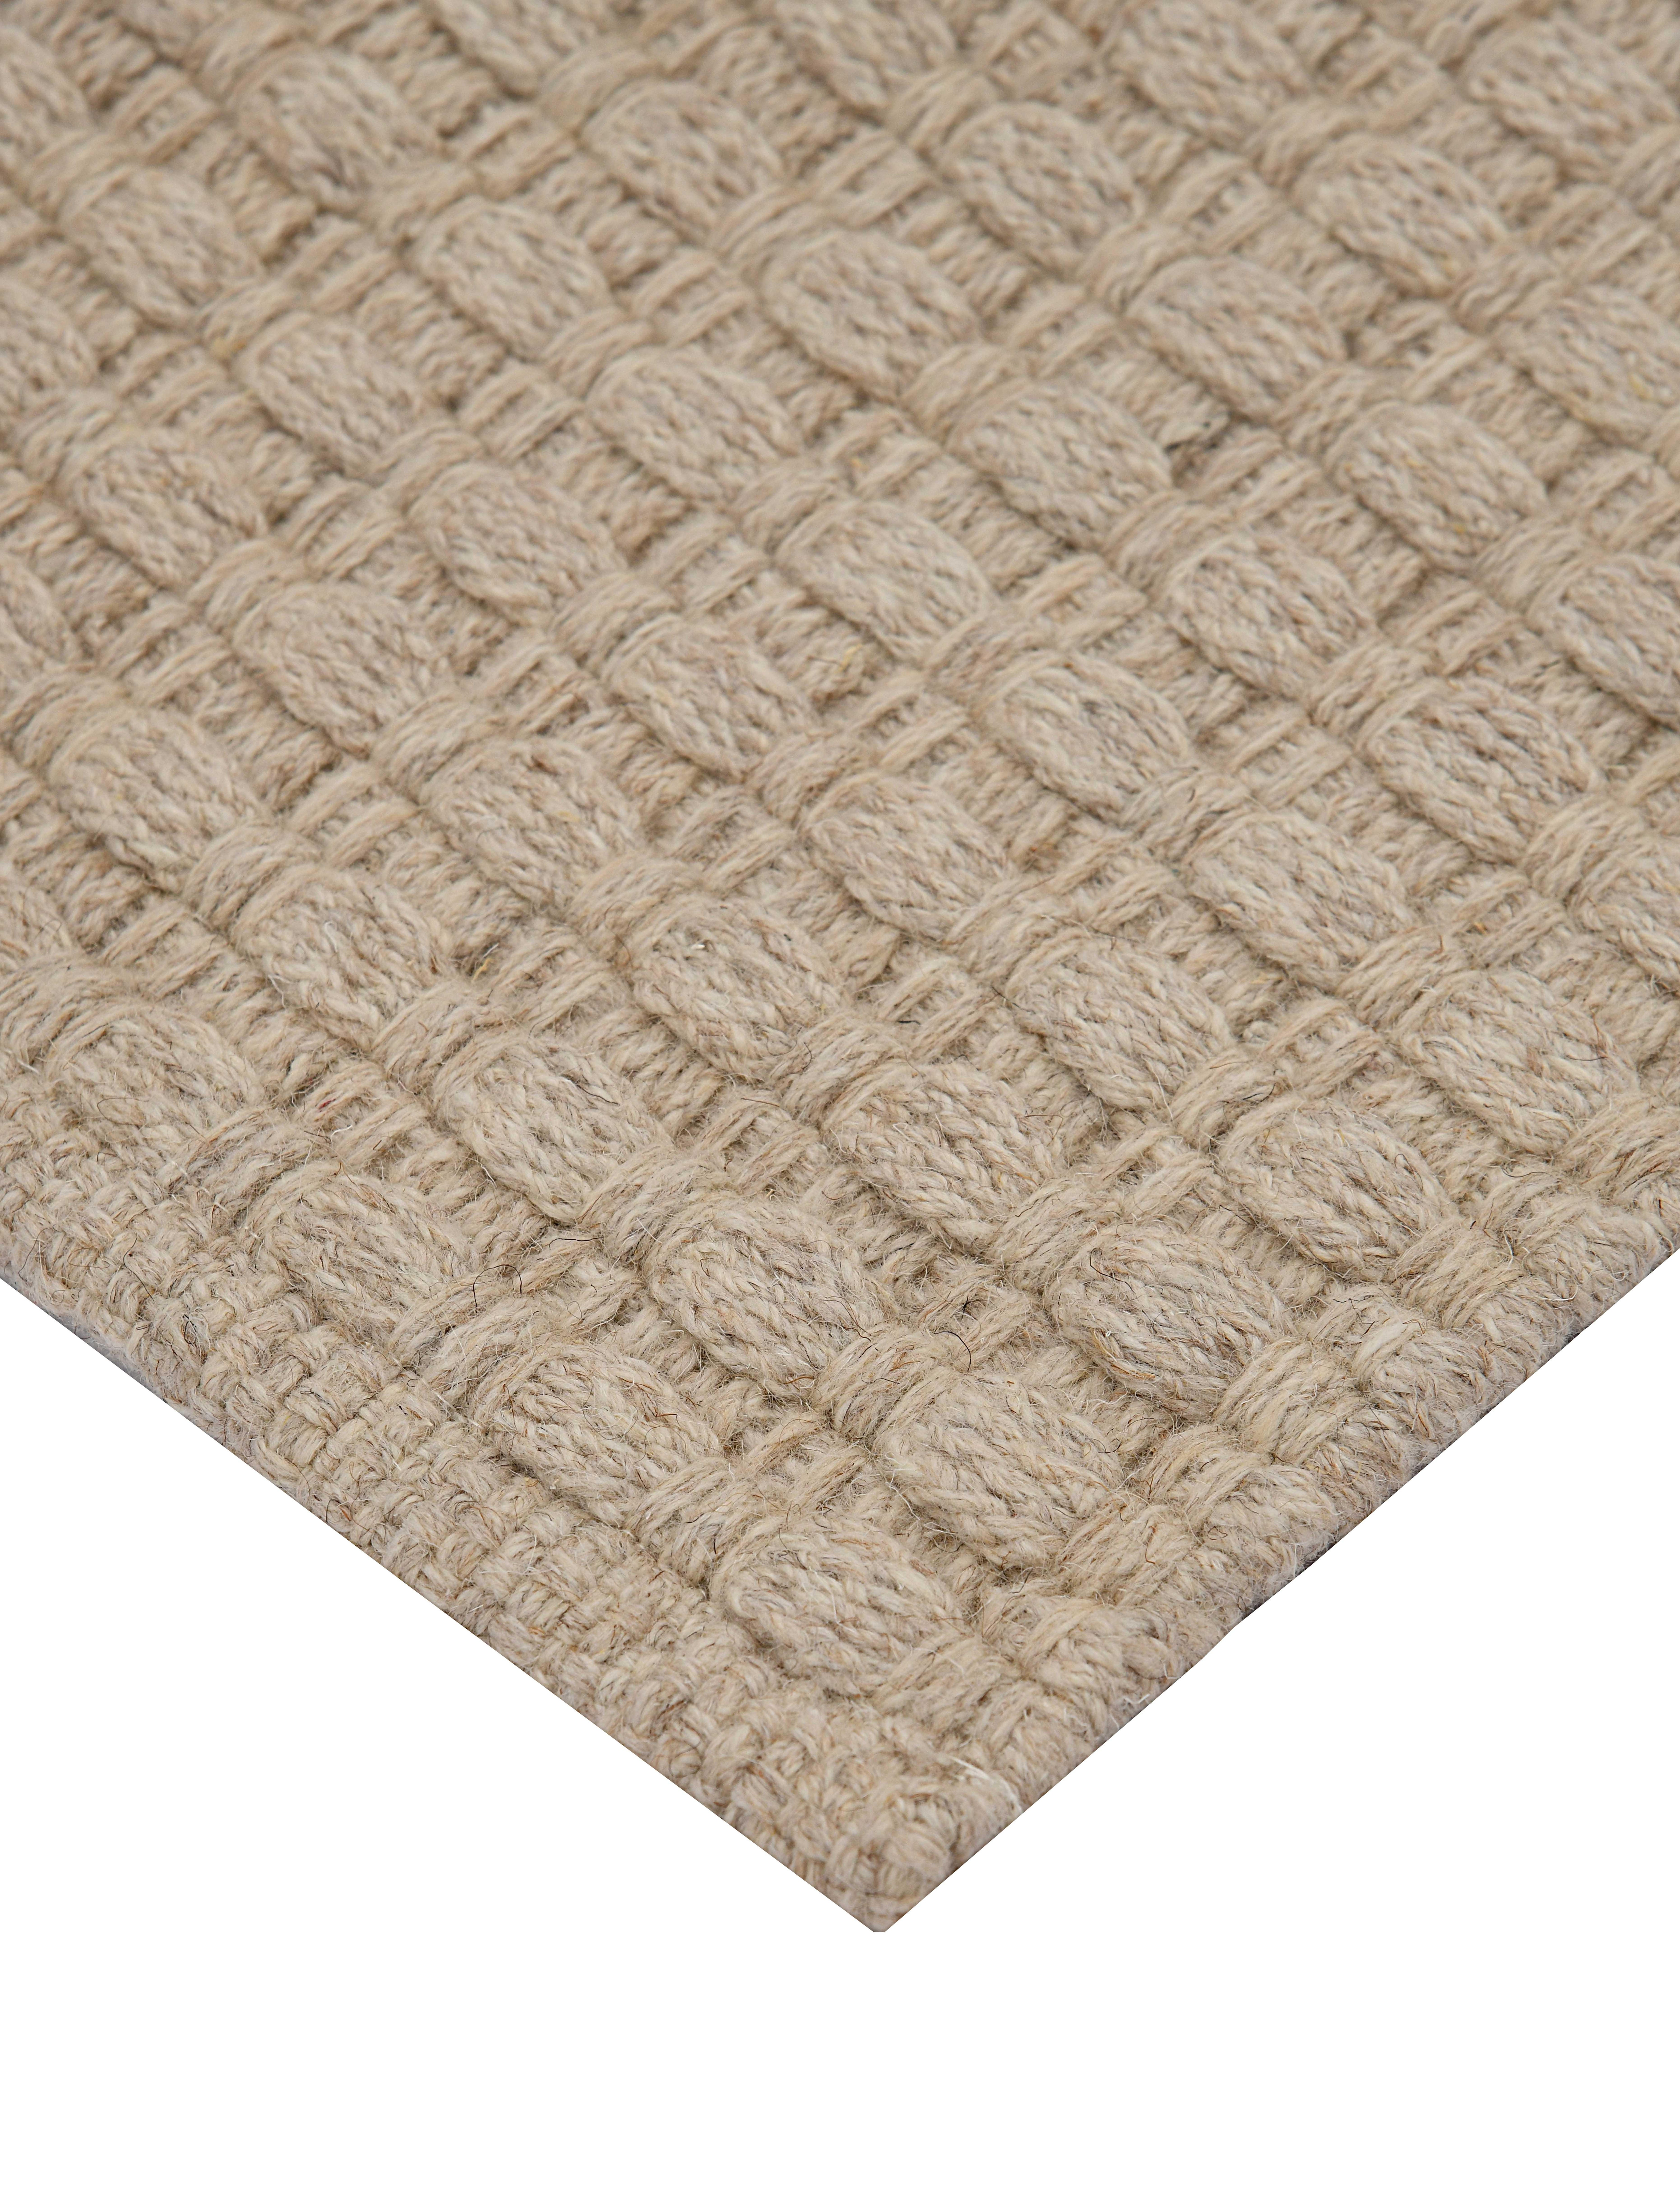 Indian Una, Beige, Handwoven Face 60% Undyed NZ Wool, 40% Undyed MED Wool, 8' x 10' For Sale